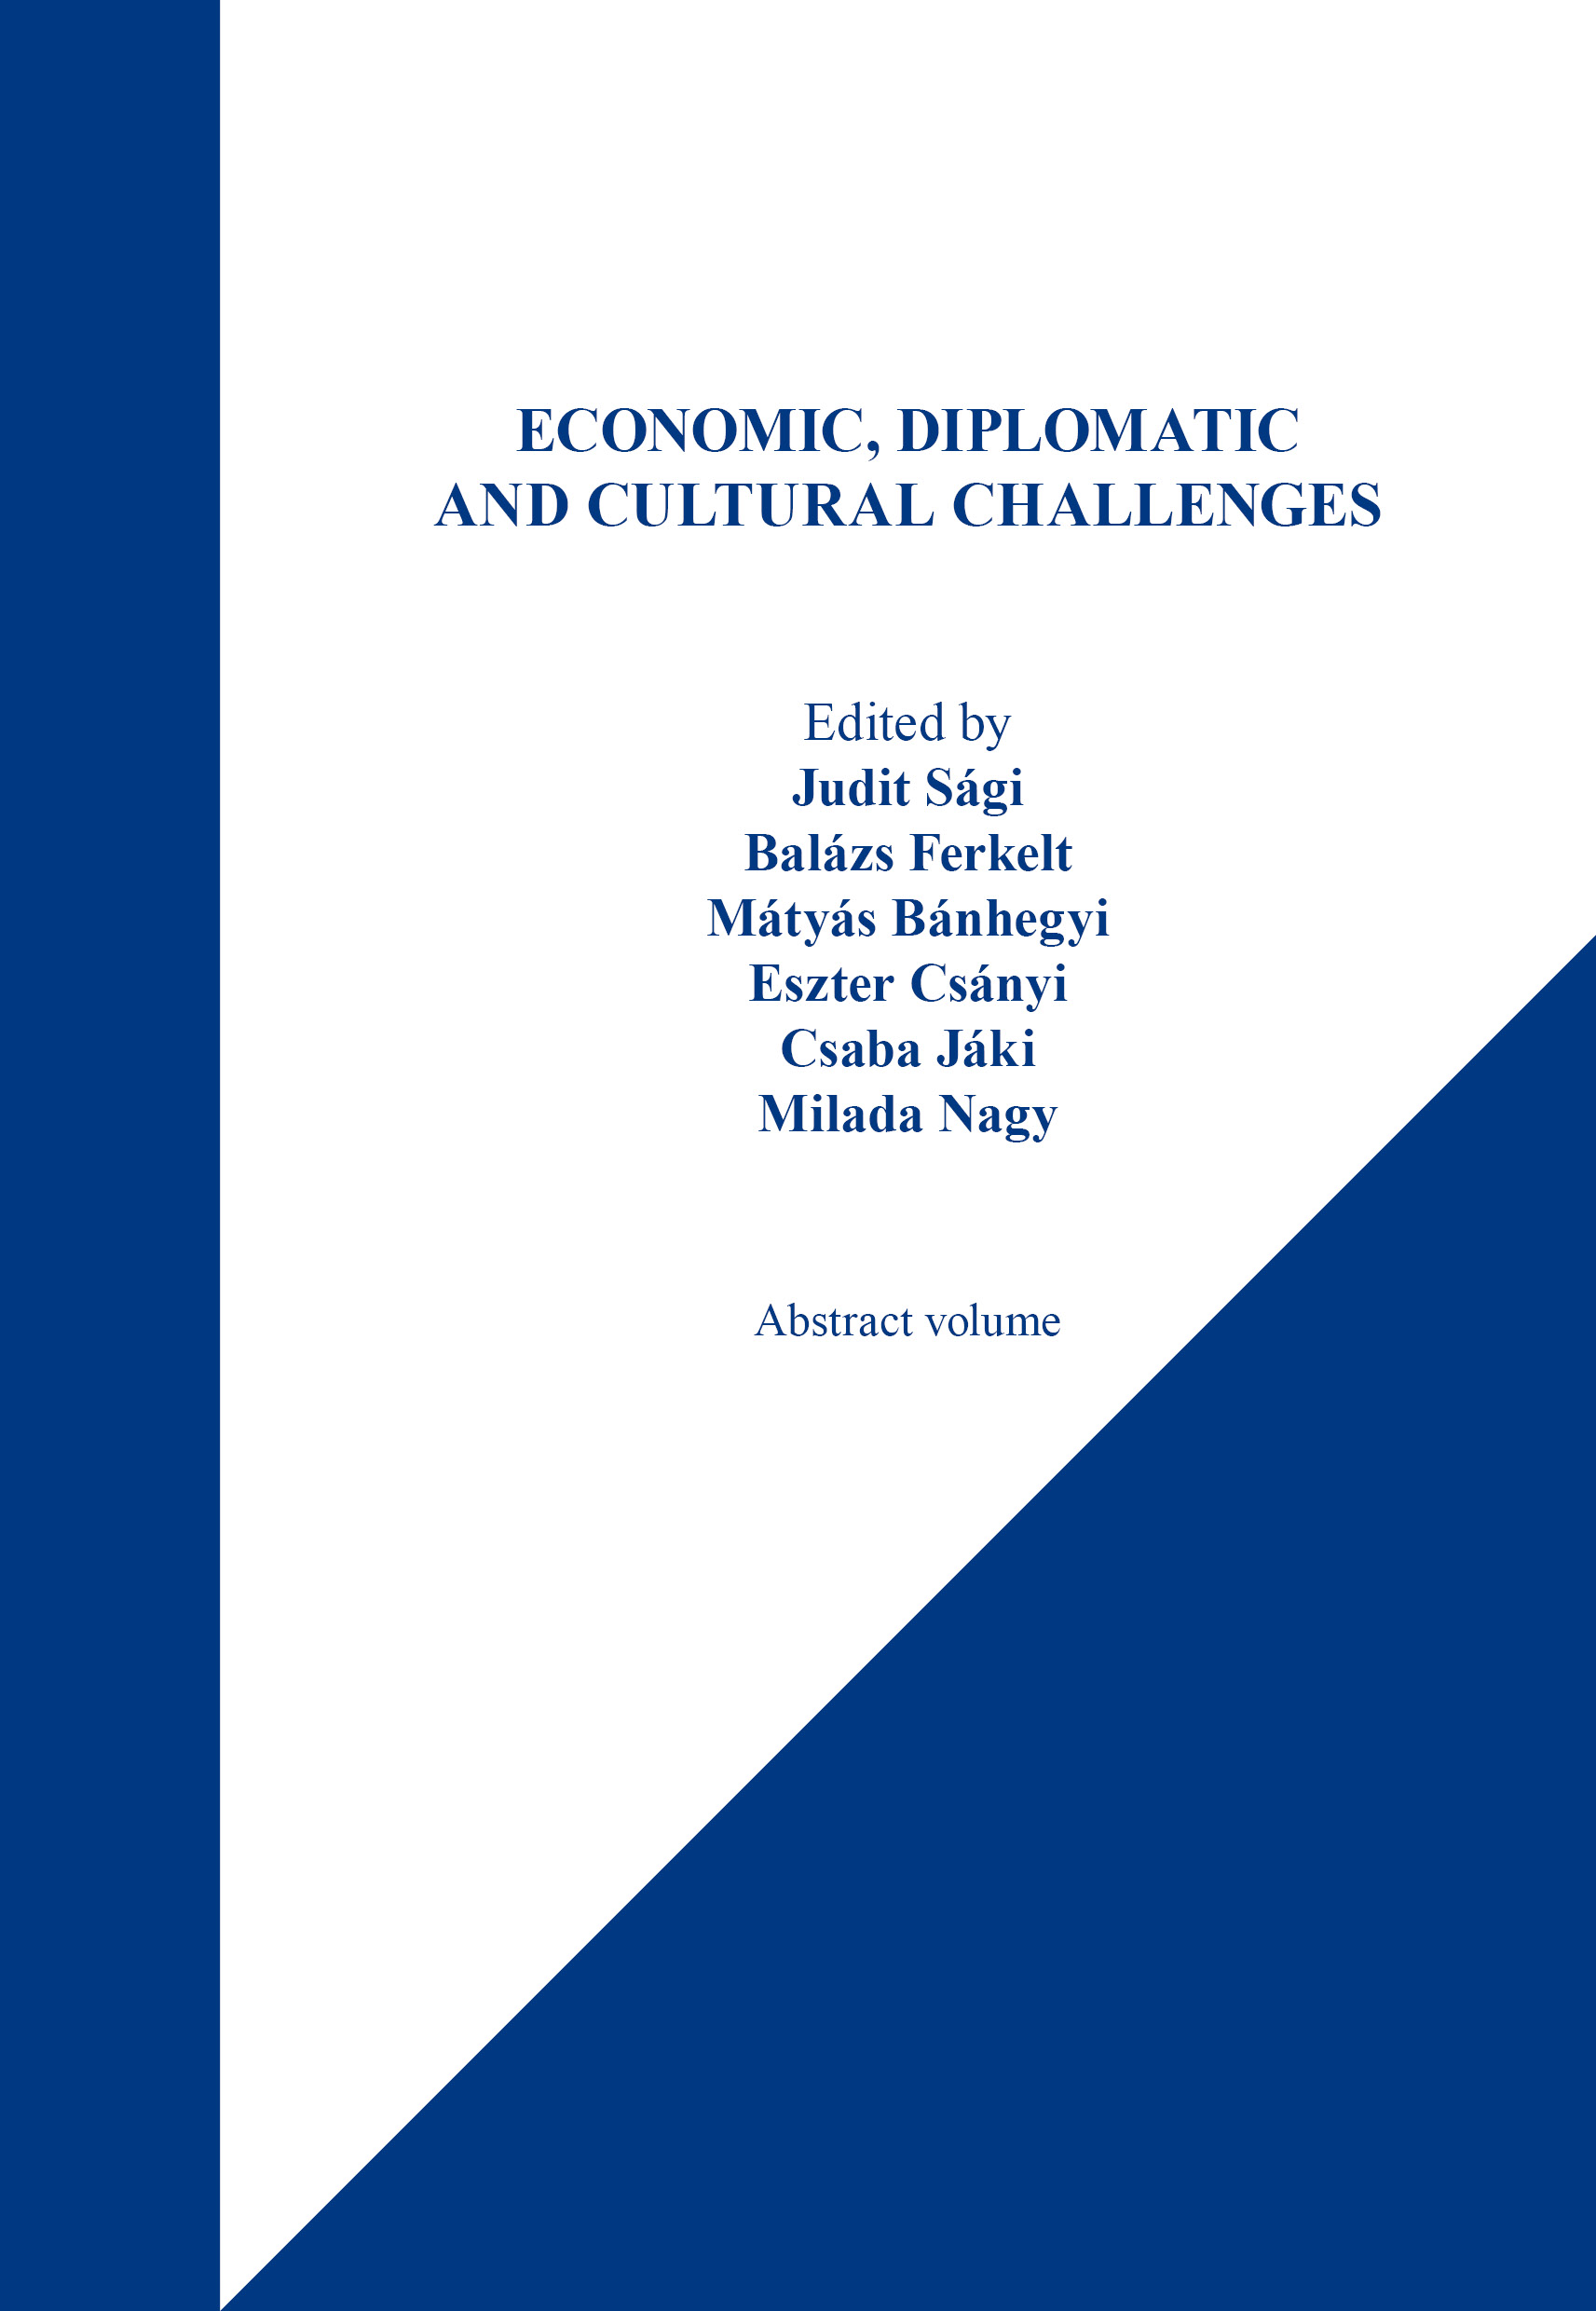 Economic, diplomatic and cultural challenges  (Abstract volume)